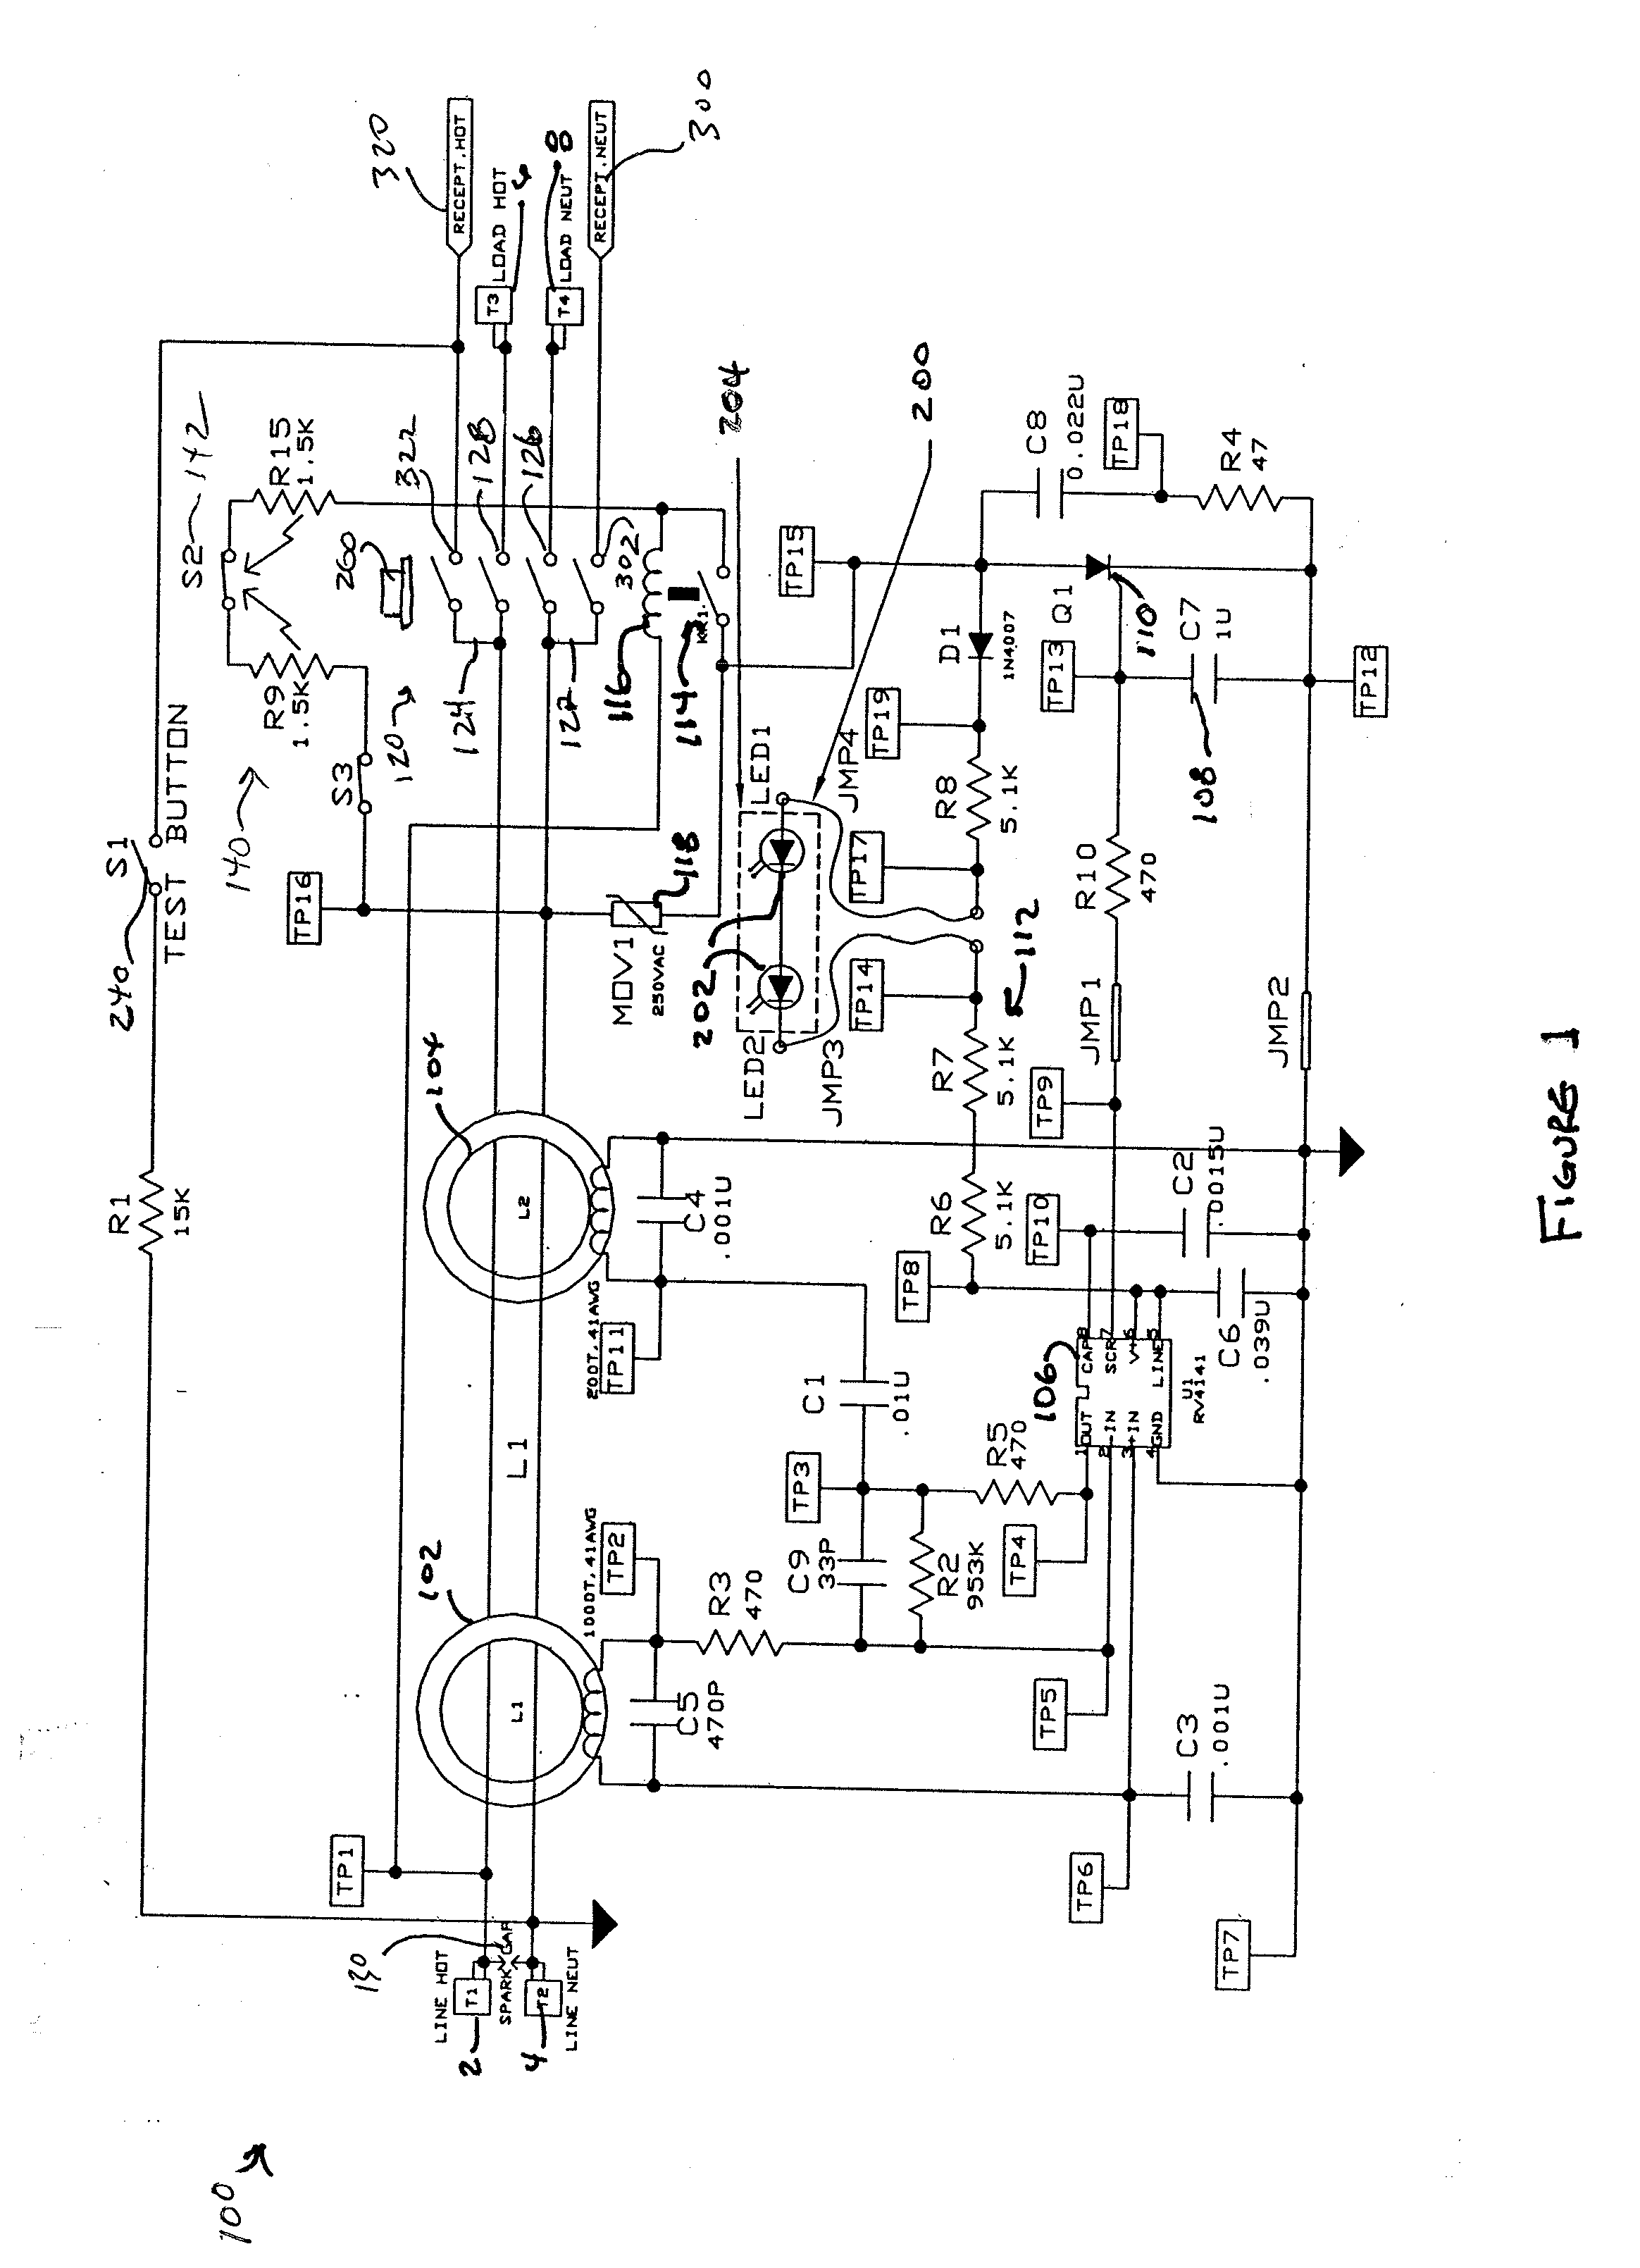 Protective Electrical Wiring Device with a Center Nightlight